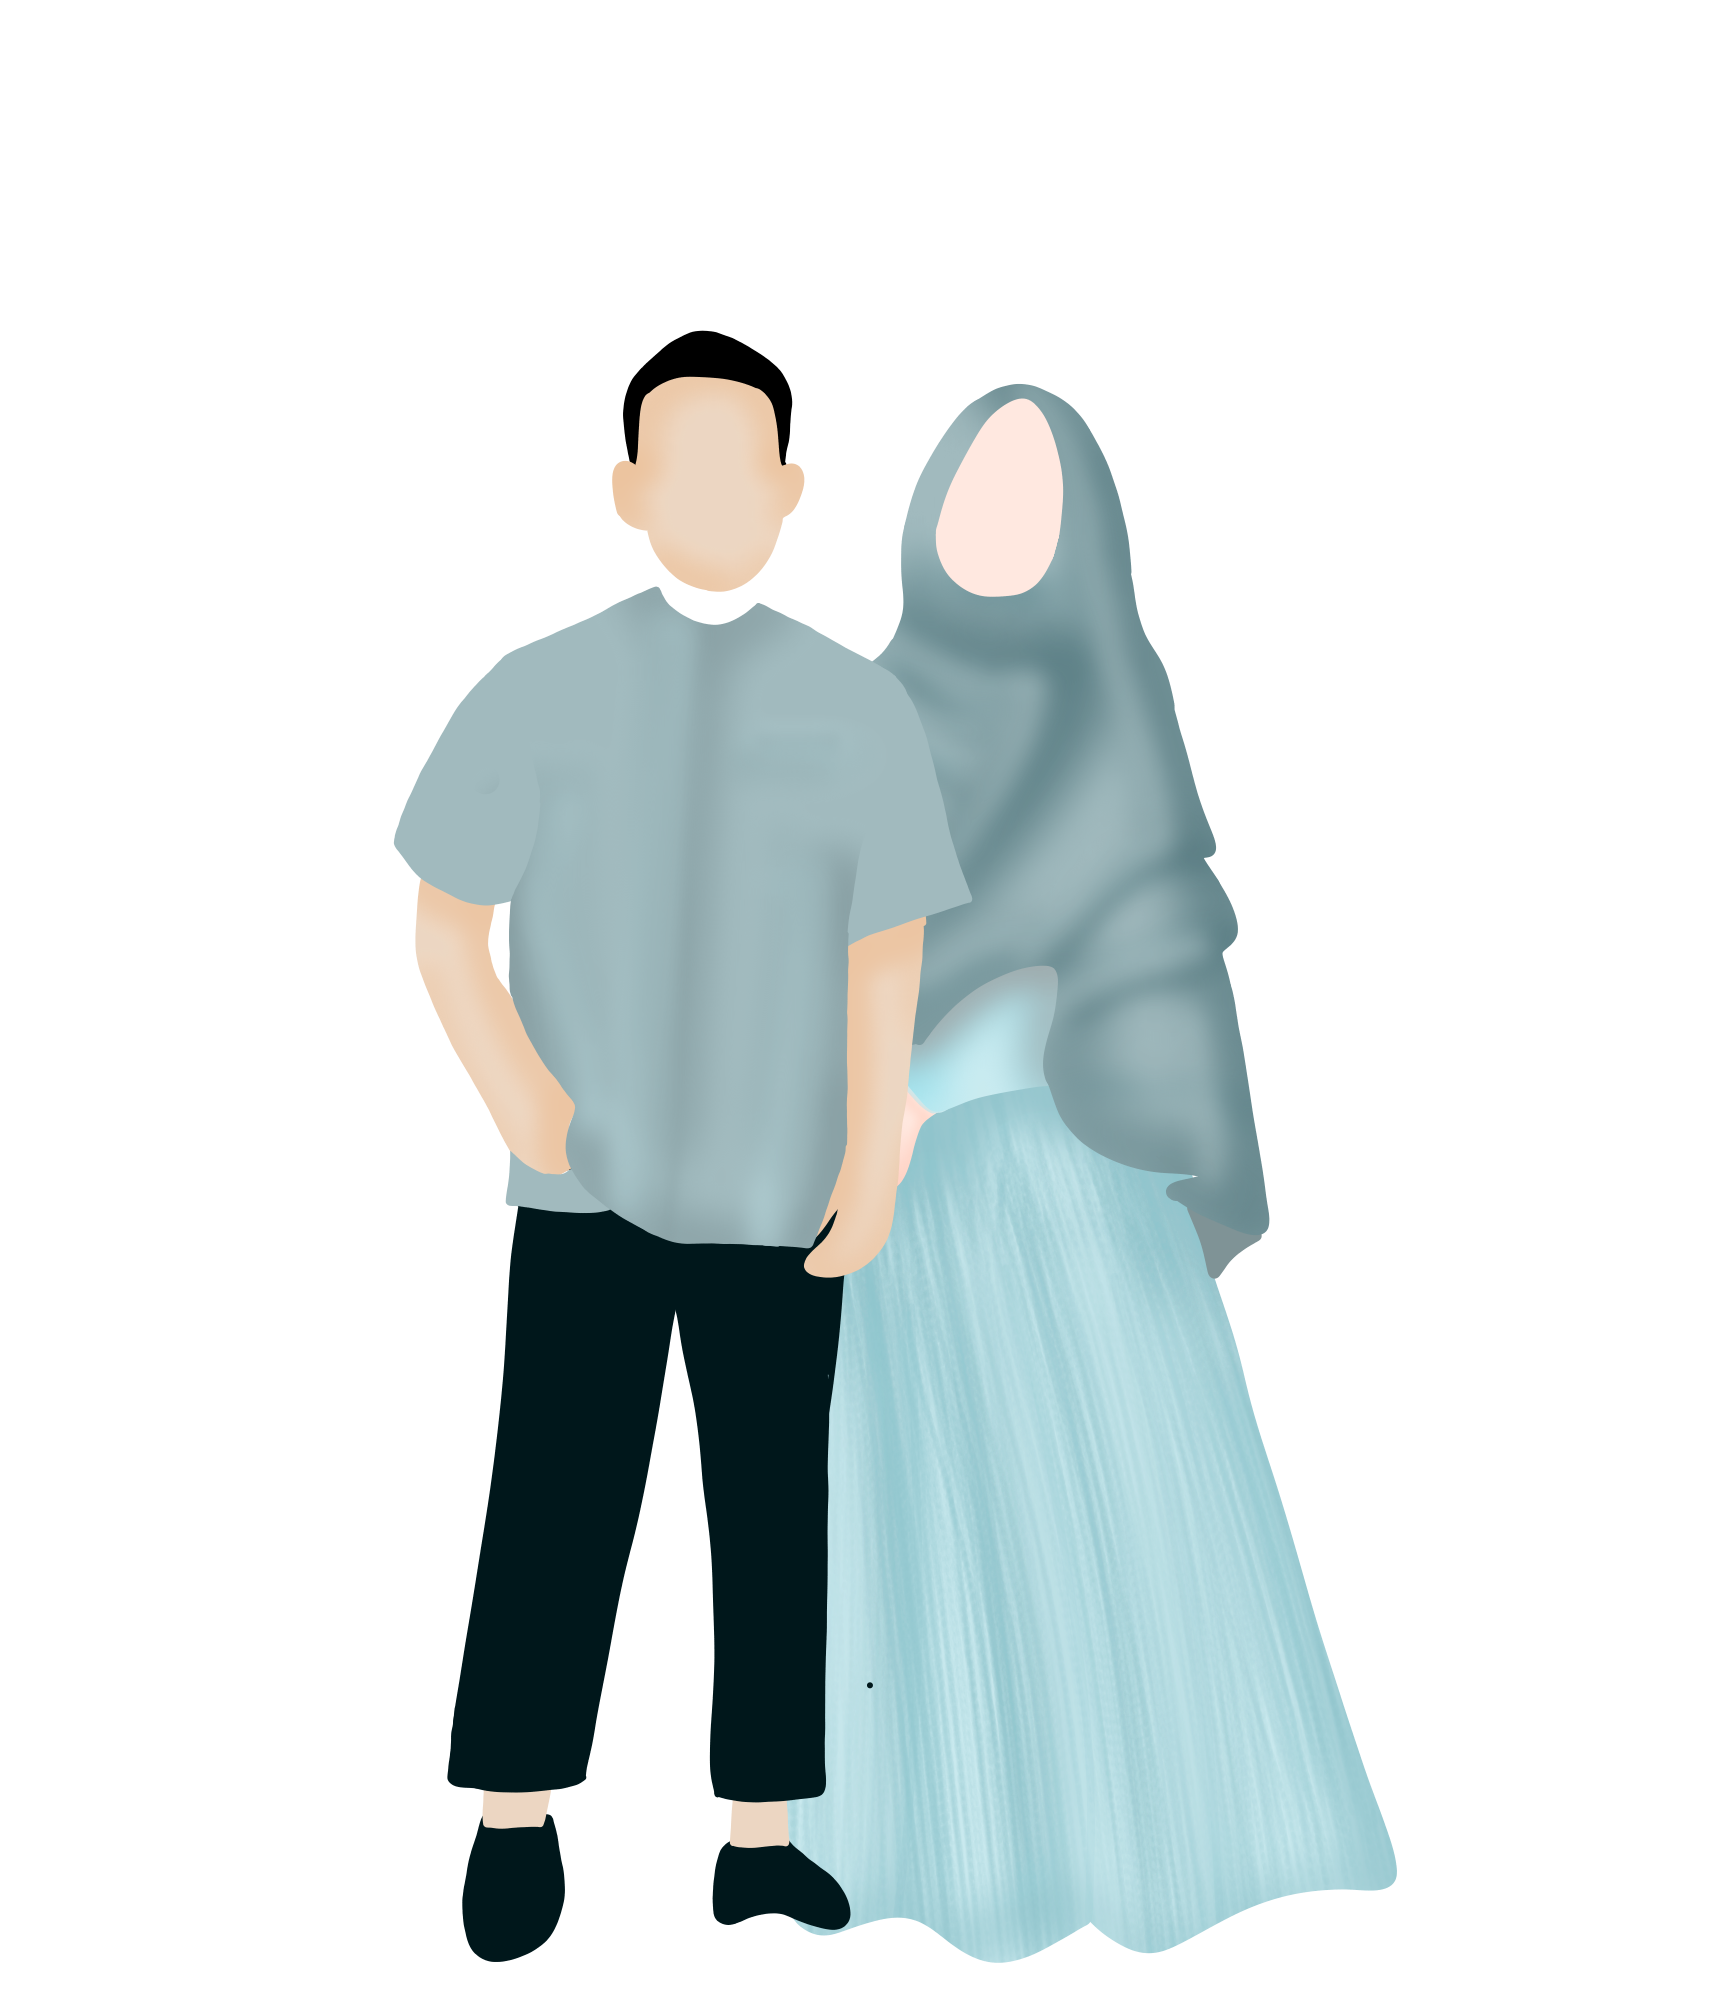 Pngtree—couple_7362150-Copy-2.png